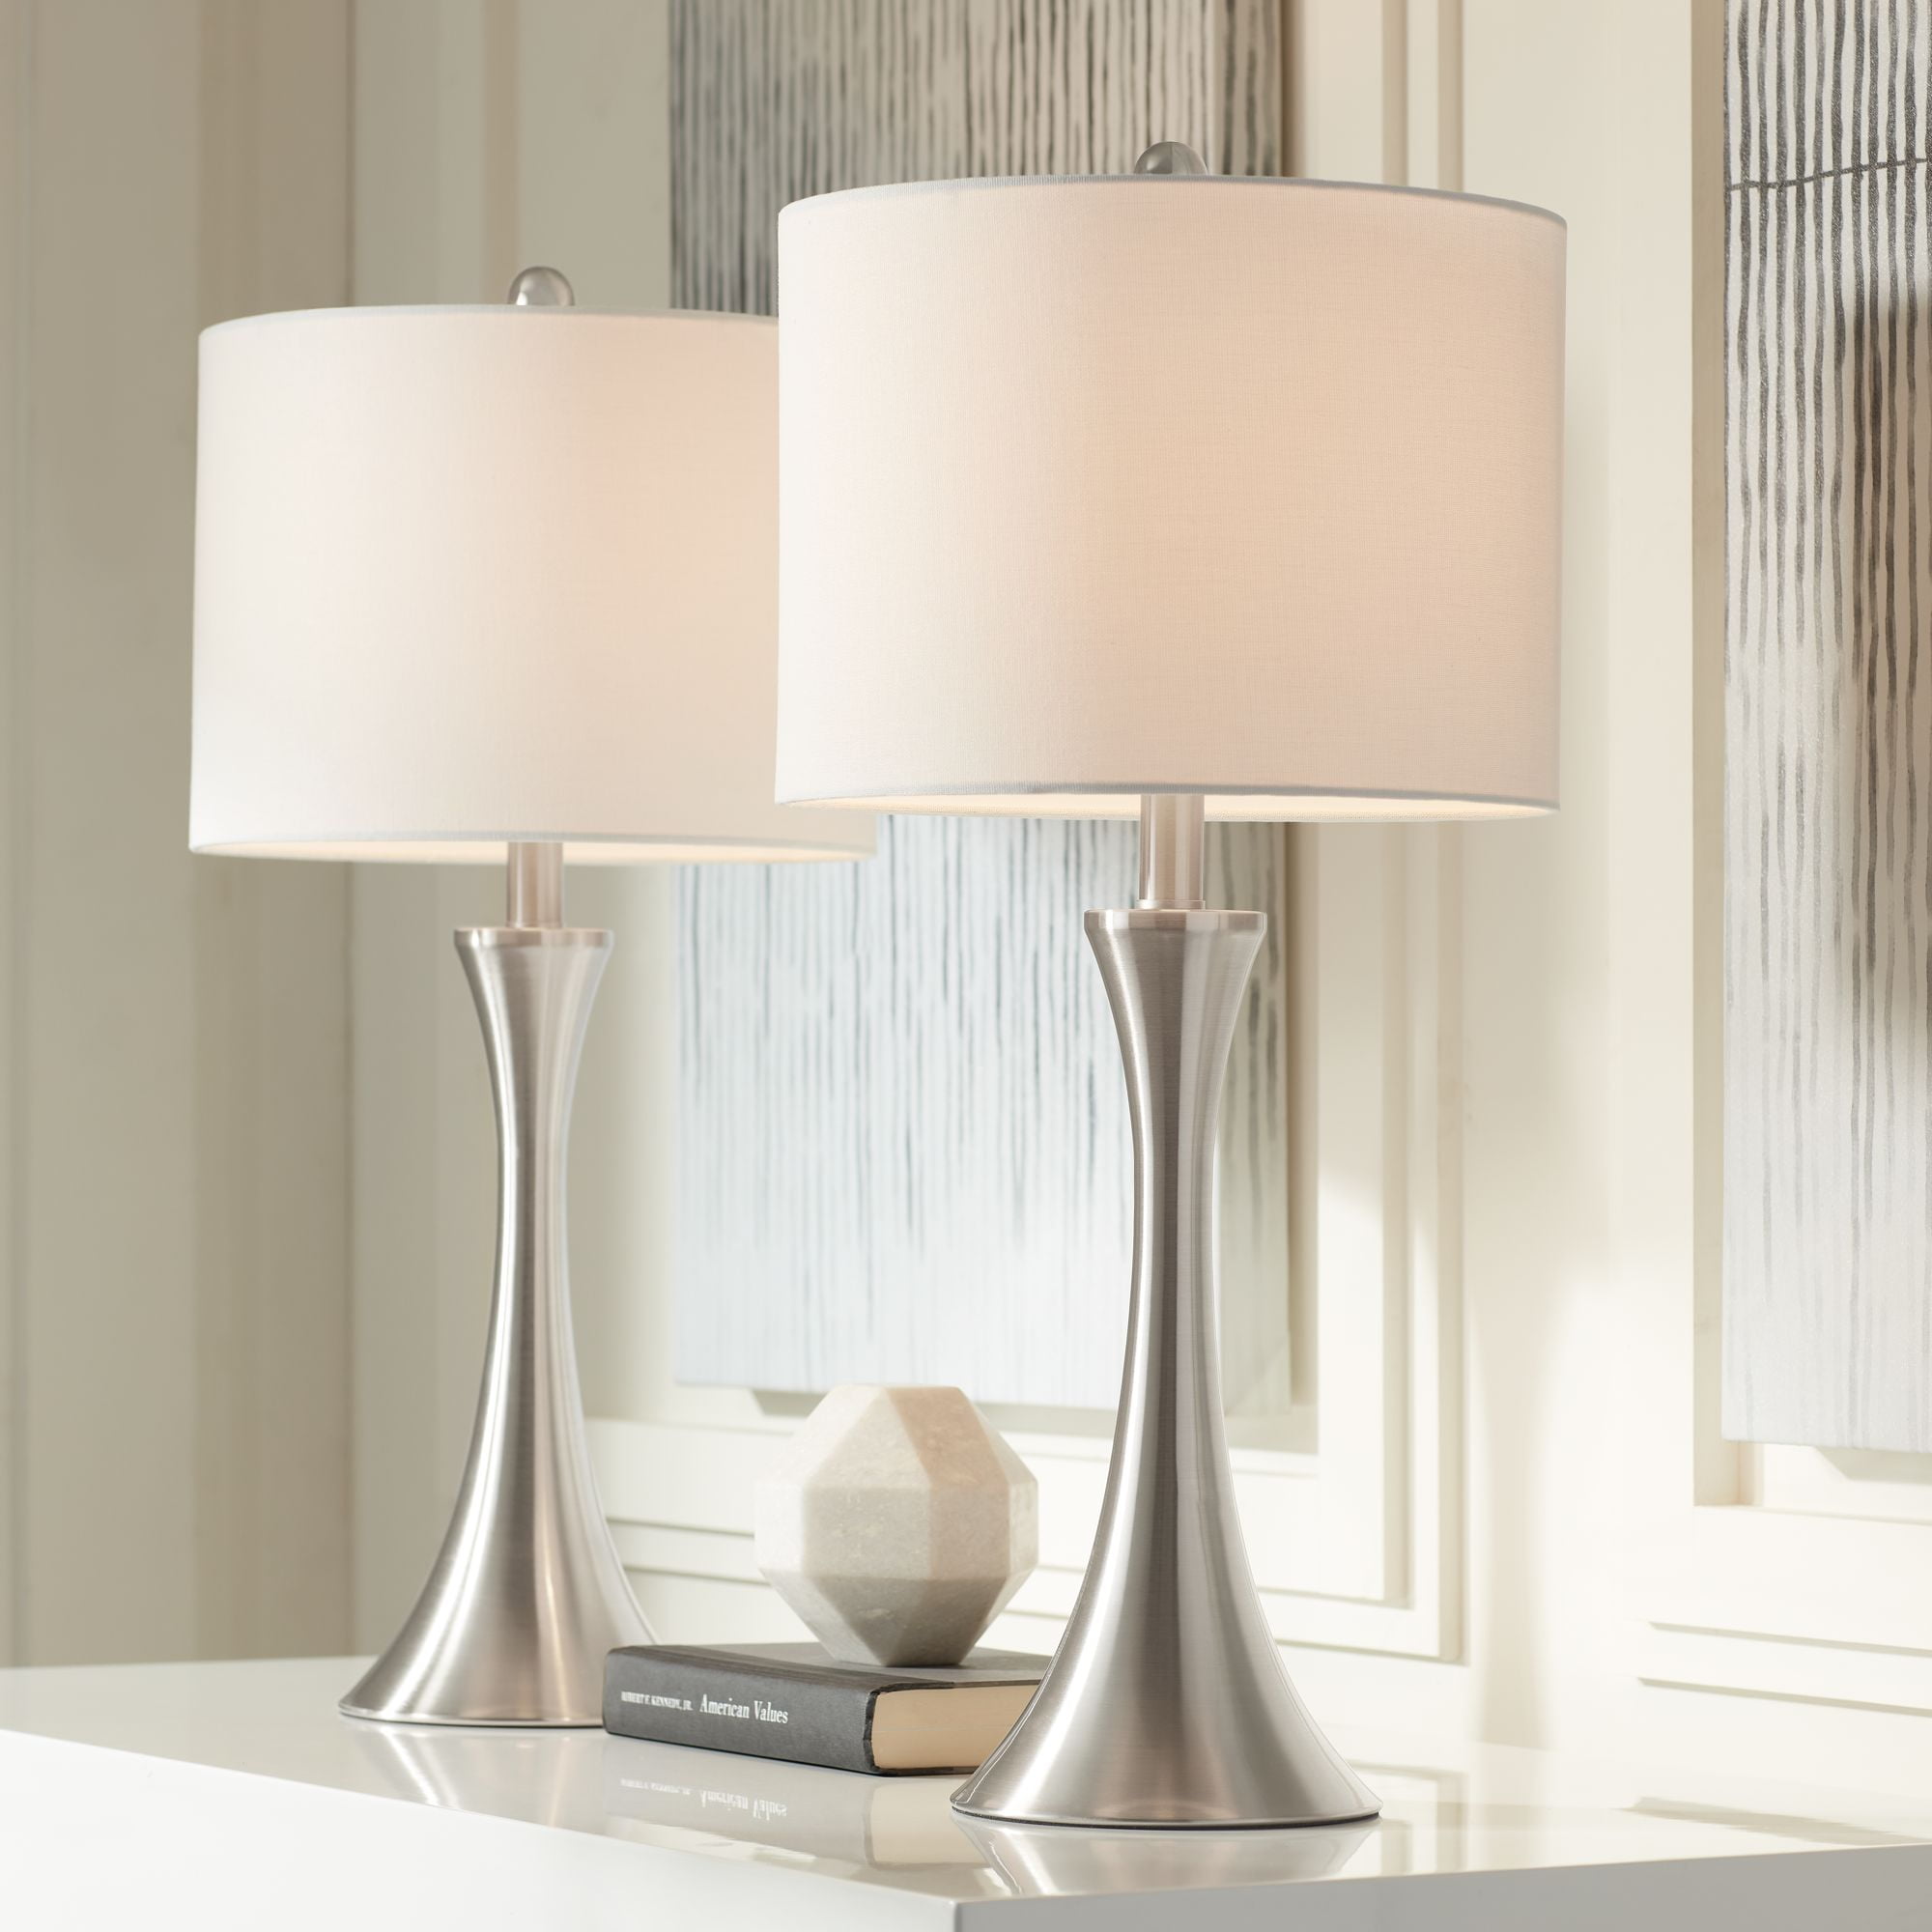 360 Lighting Modern Table Lamps Set Of, How To Change A Table Lamp Shade